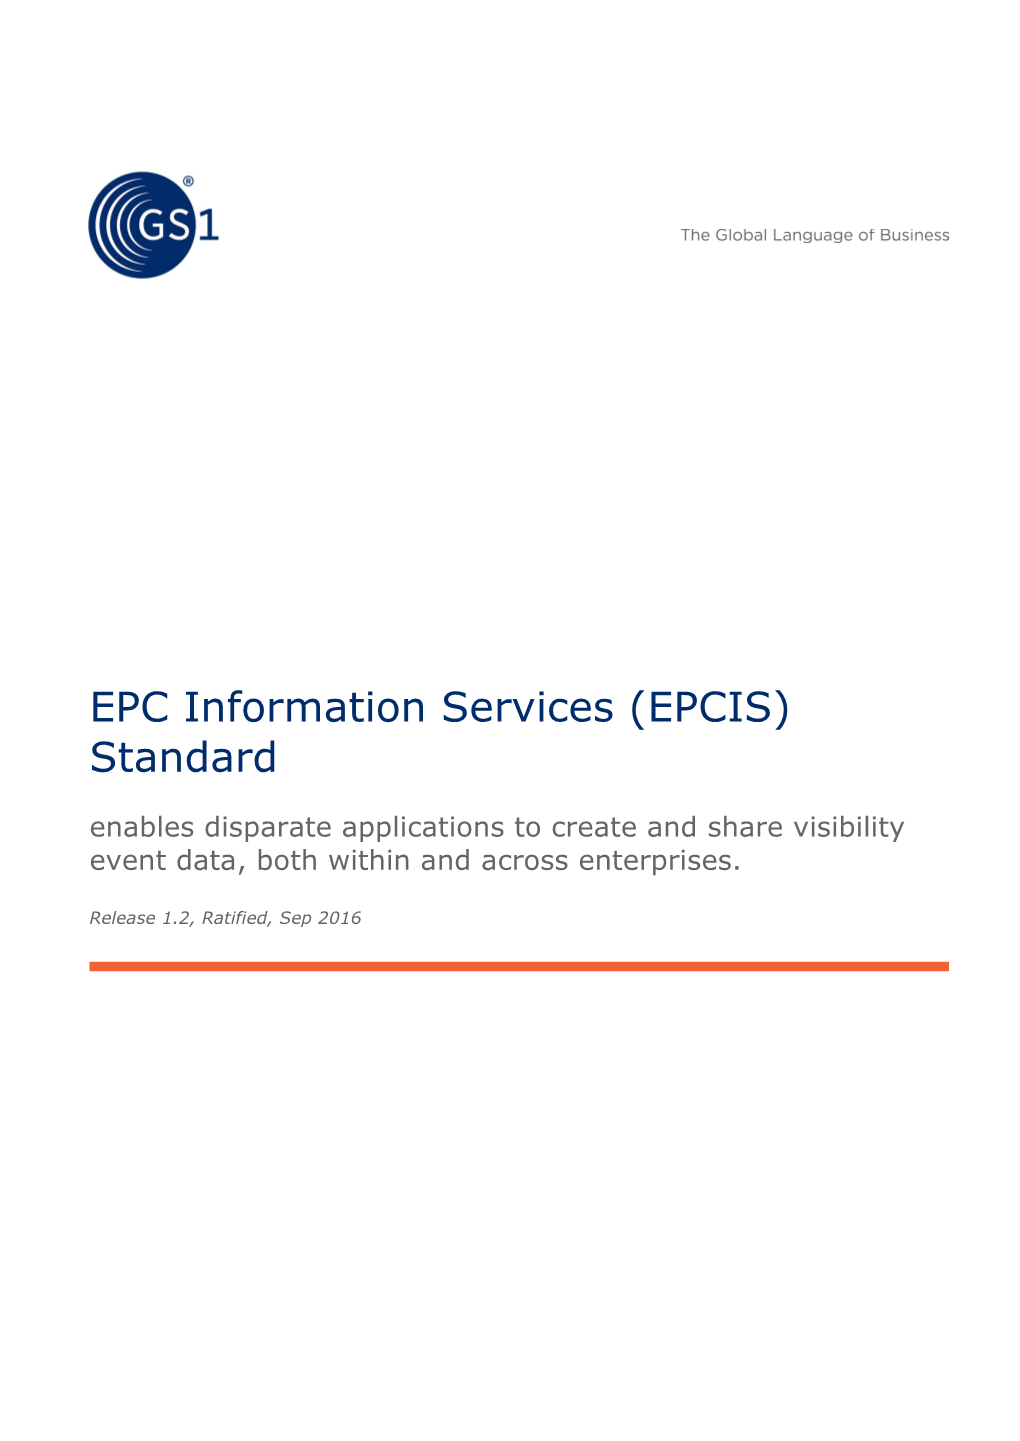 EPC Information Services (EPCIS) Standard Enables Disparate Applications to Create and Share Visibility Event Data, Both Within and Across Enterprises